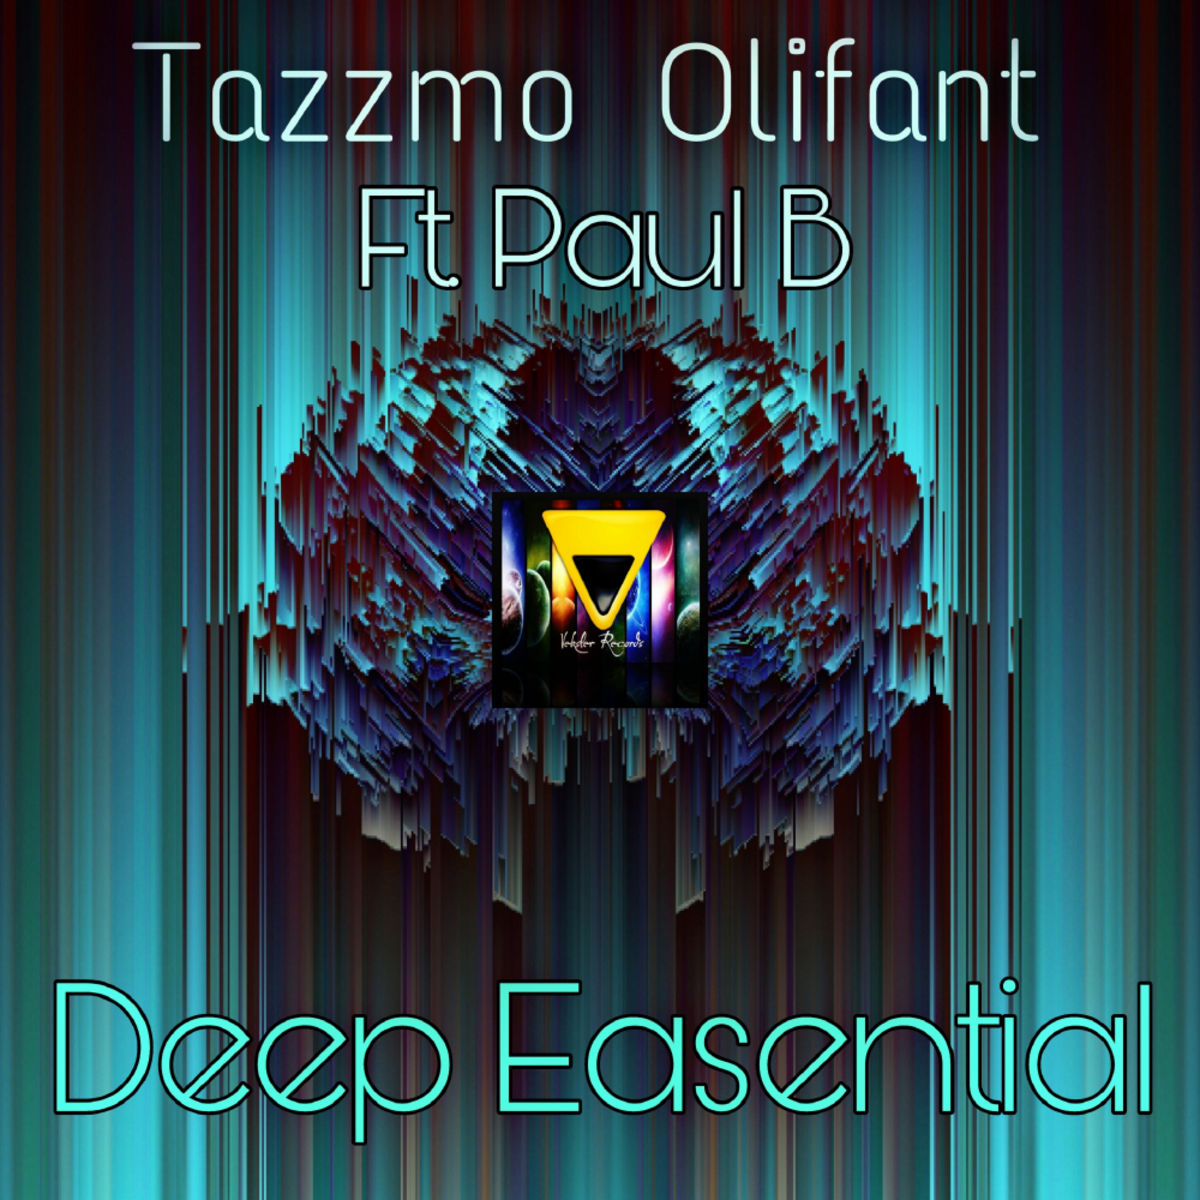 Tazzmo Olifant ft Paul B - Deep Essential / Veksler Records